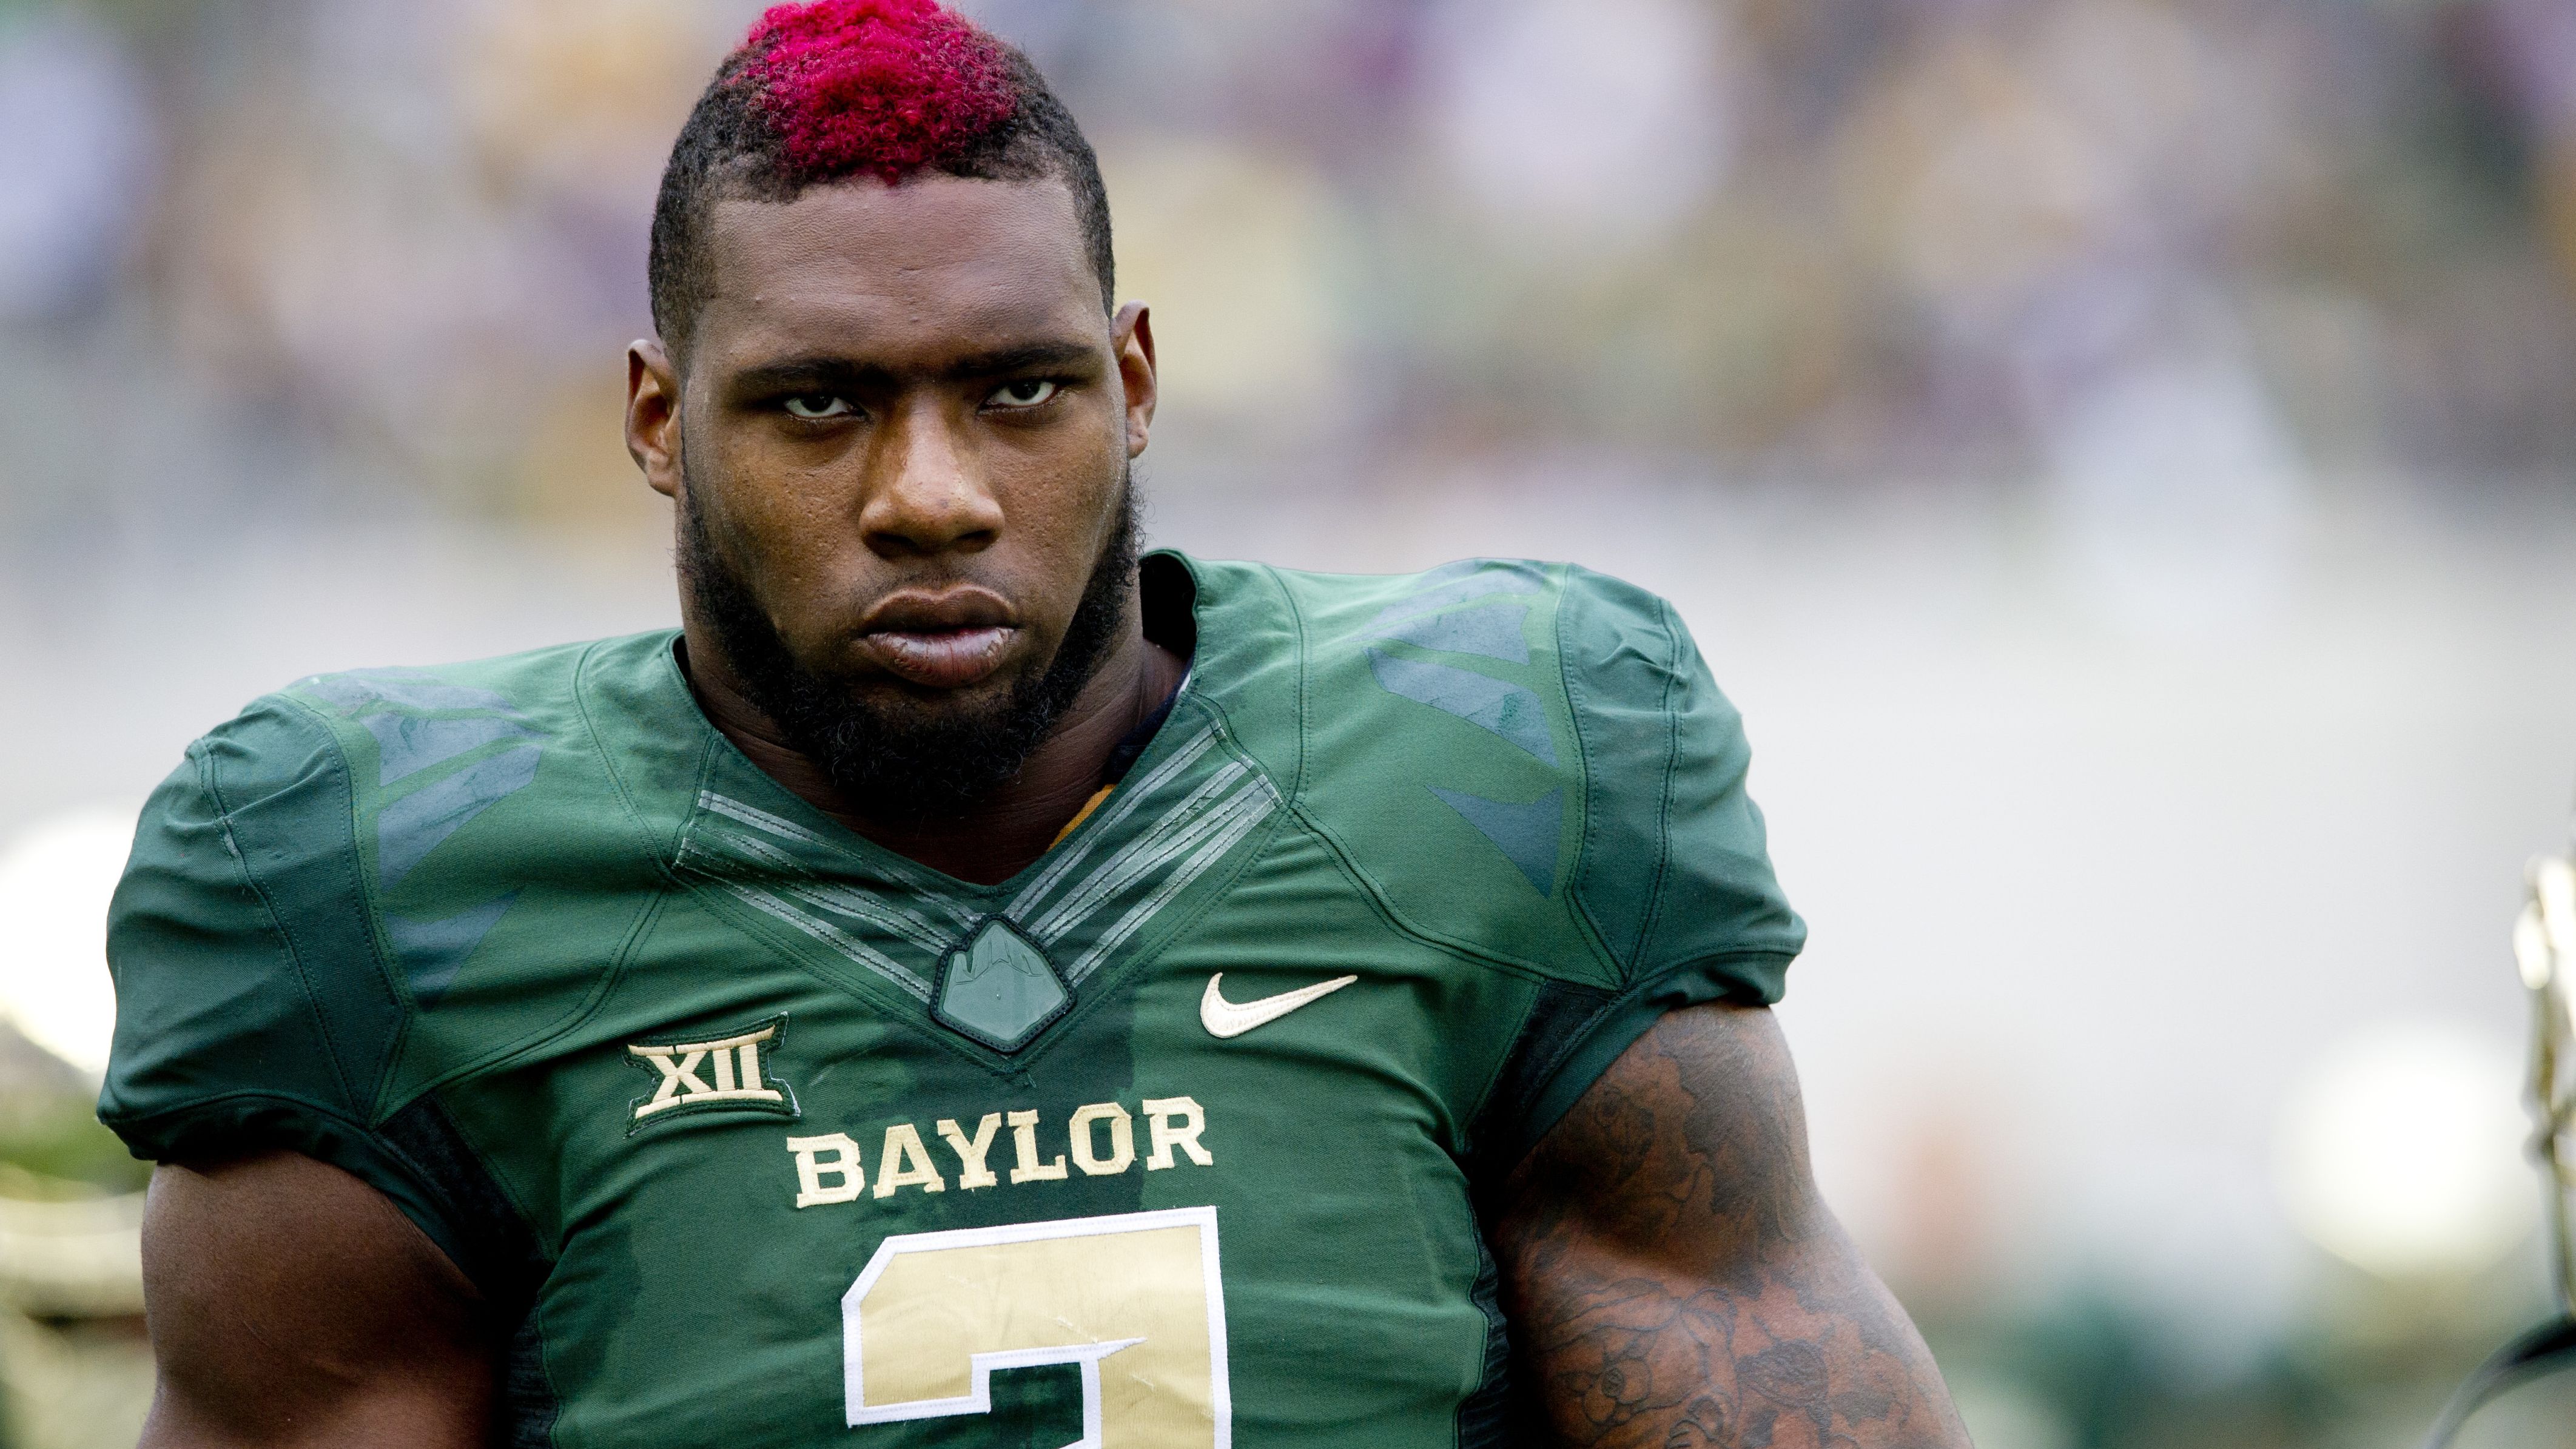 Ex-Baylor football player Shawn Oakman was indicted in a sexual assault case in 2016.